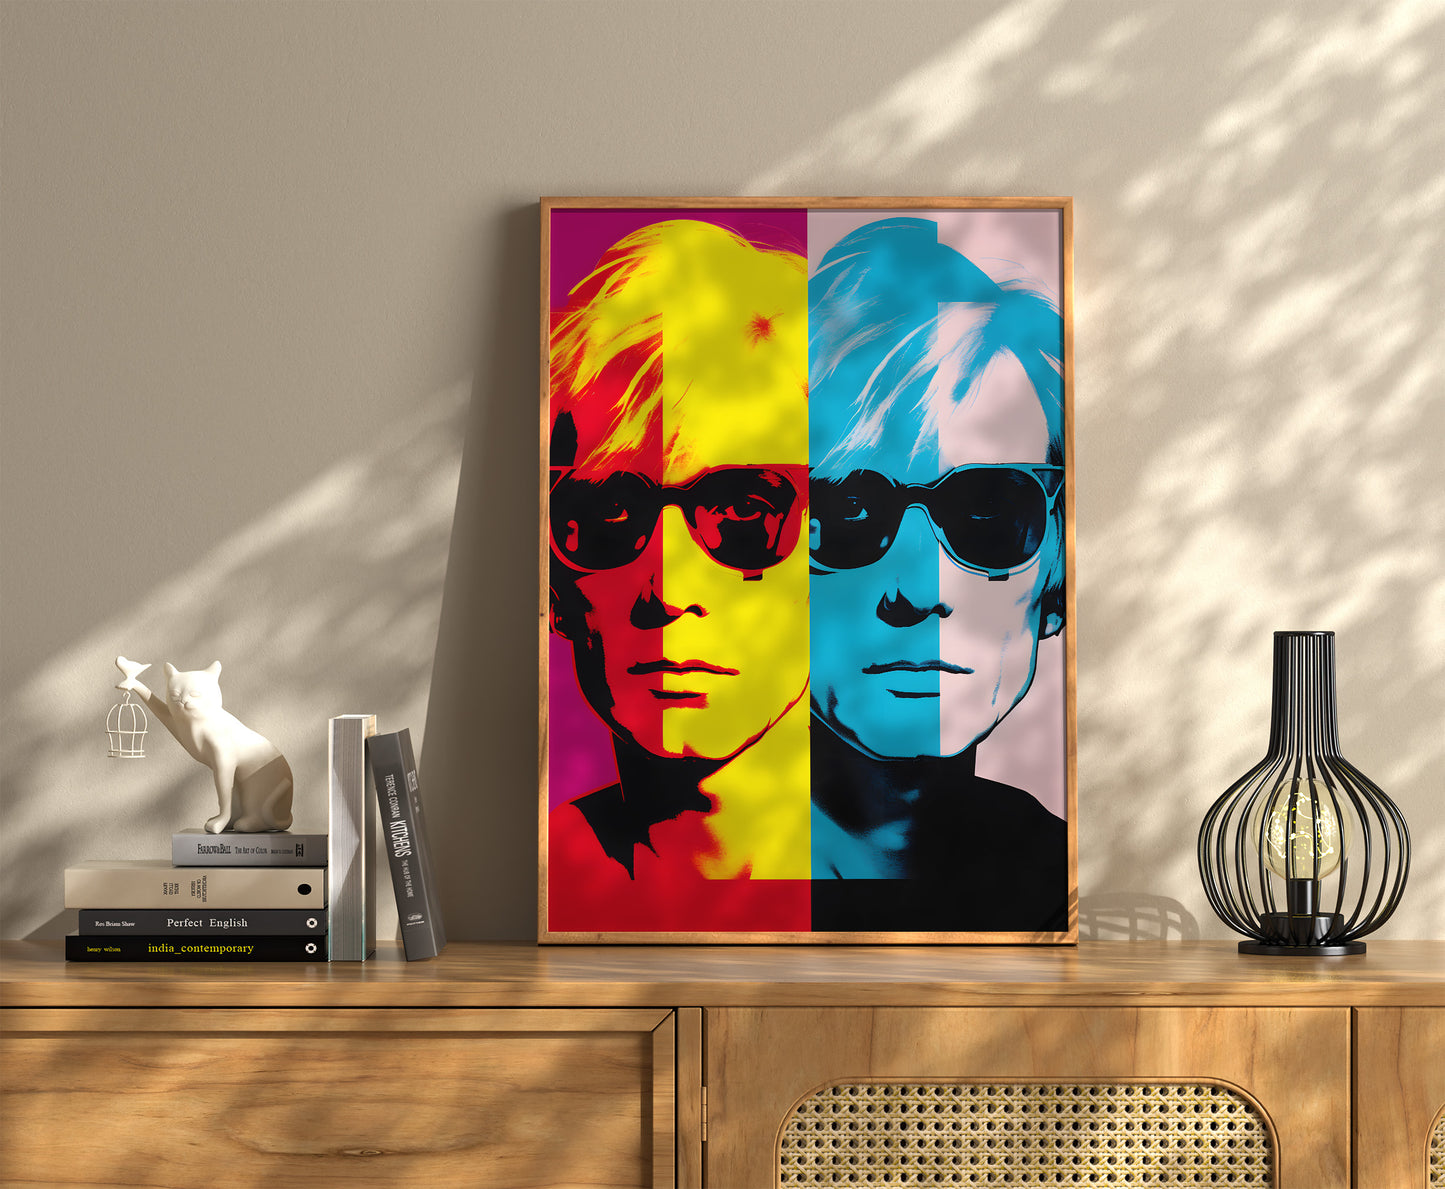 Pop art style portrait of a man with sunglasses on a wall, beside books and a vase.